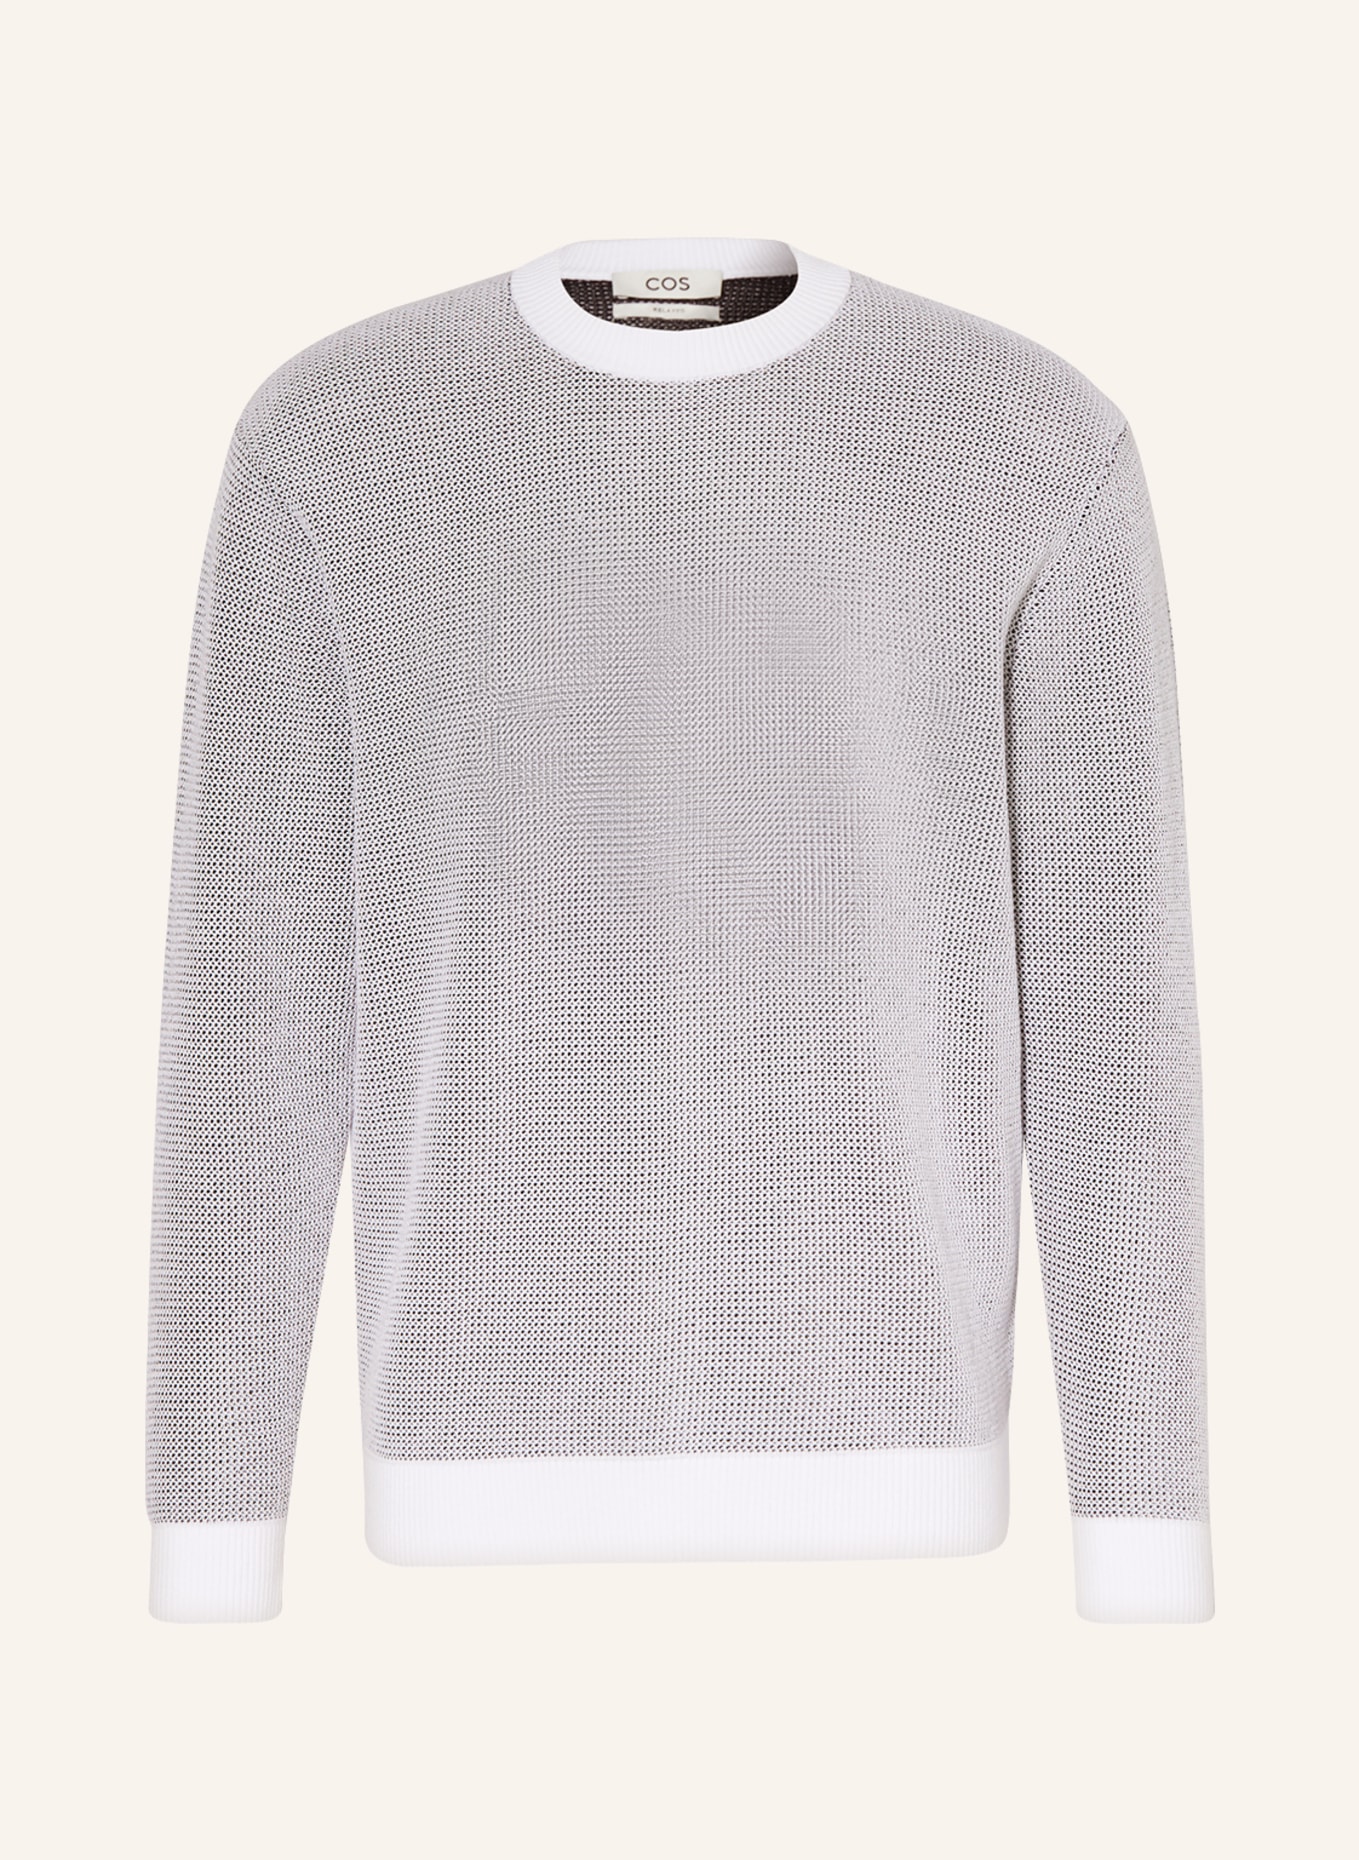 COS Sweater, Color: WHITE/ BLACK (Image 1)